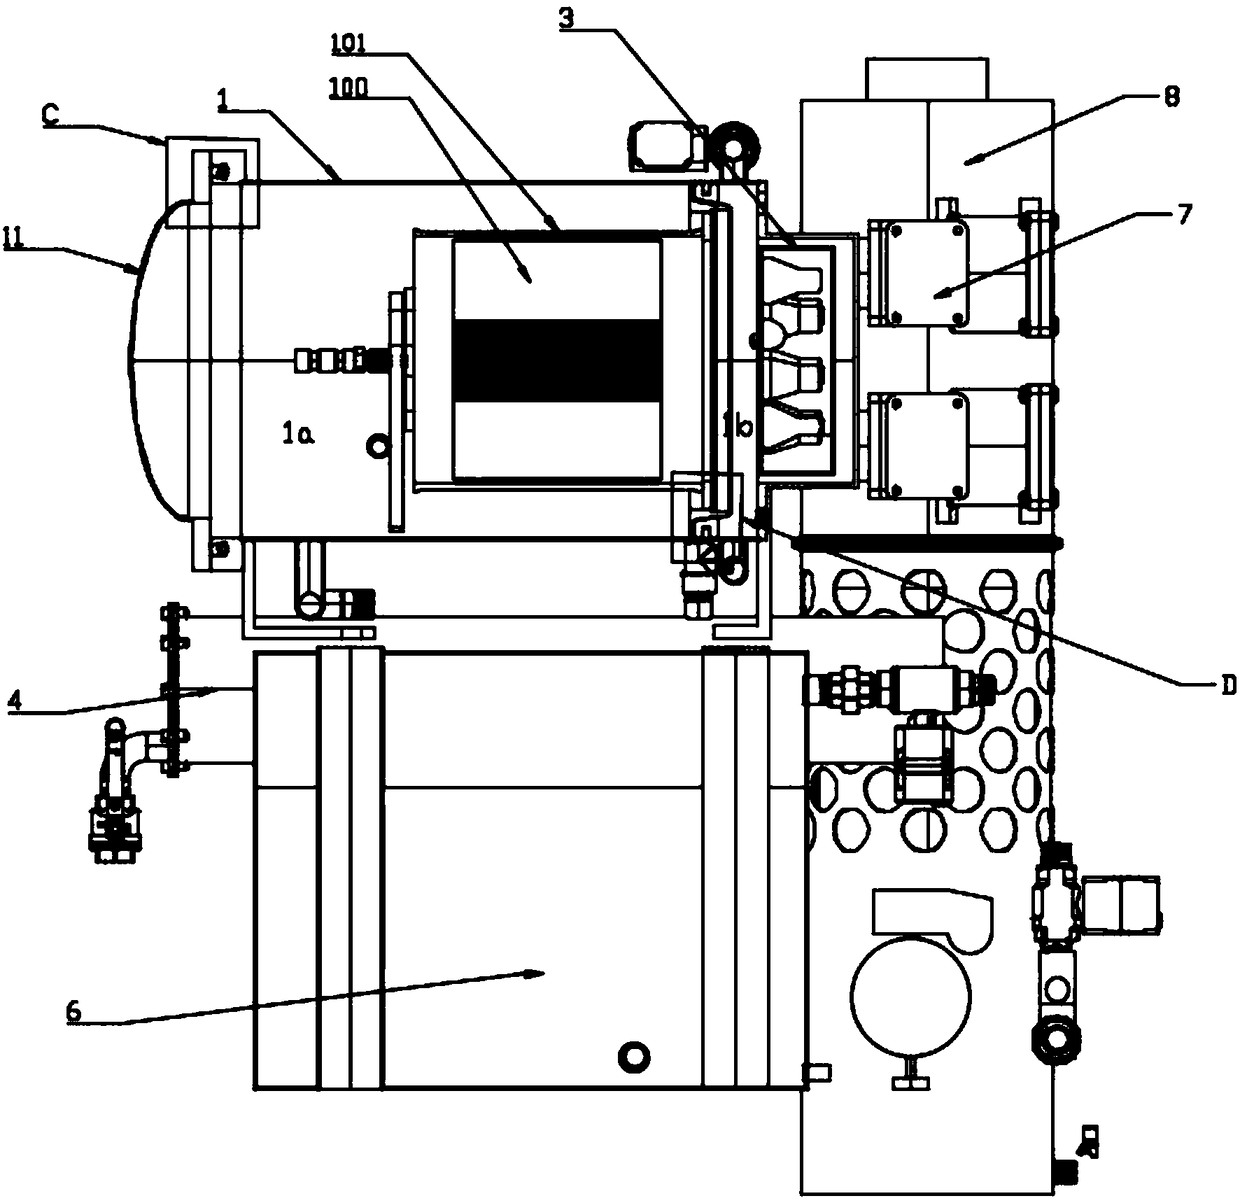 DPF (Diesel Particulate Filter) installing frame of DPF cleaning device